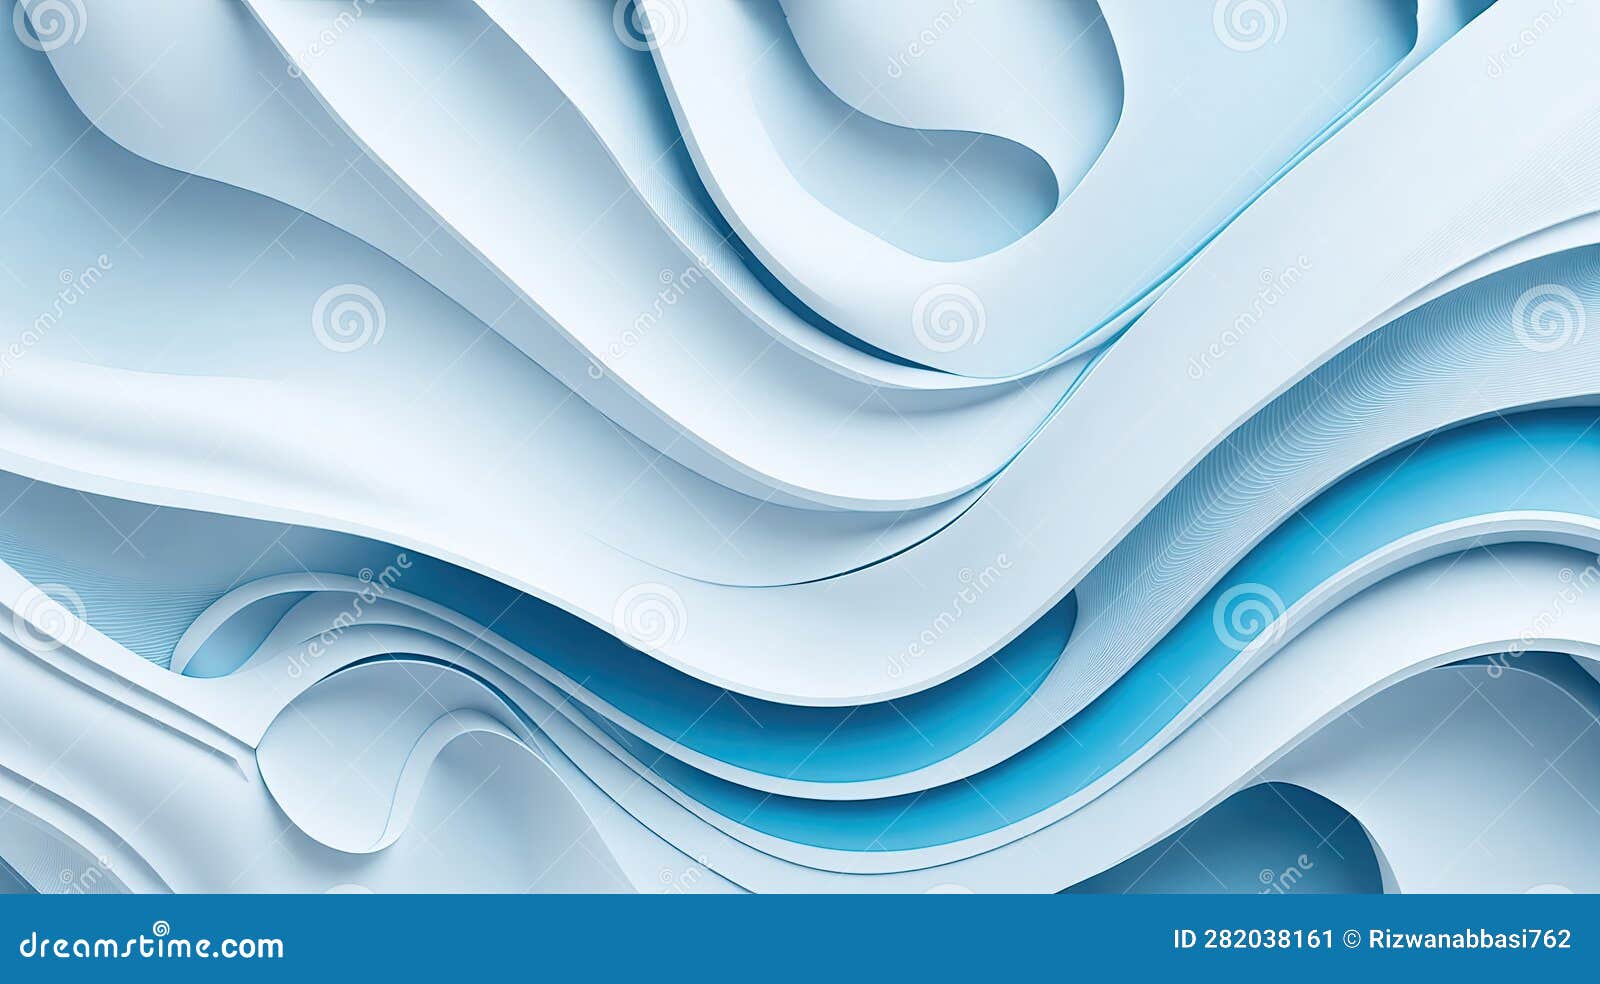 light blue gray golden and white background 3d abstract